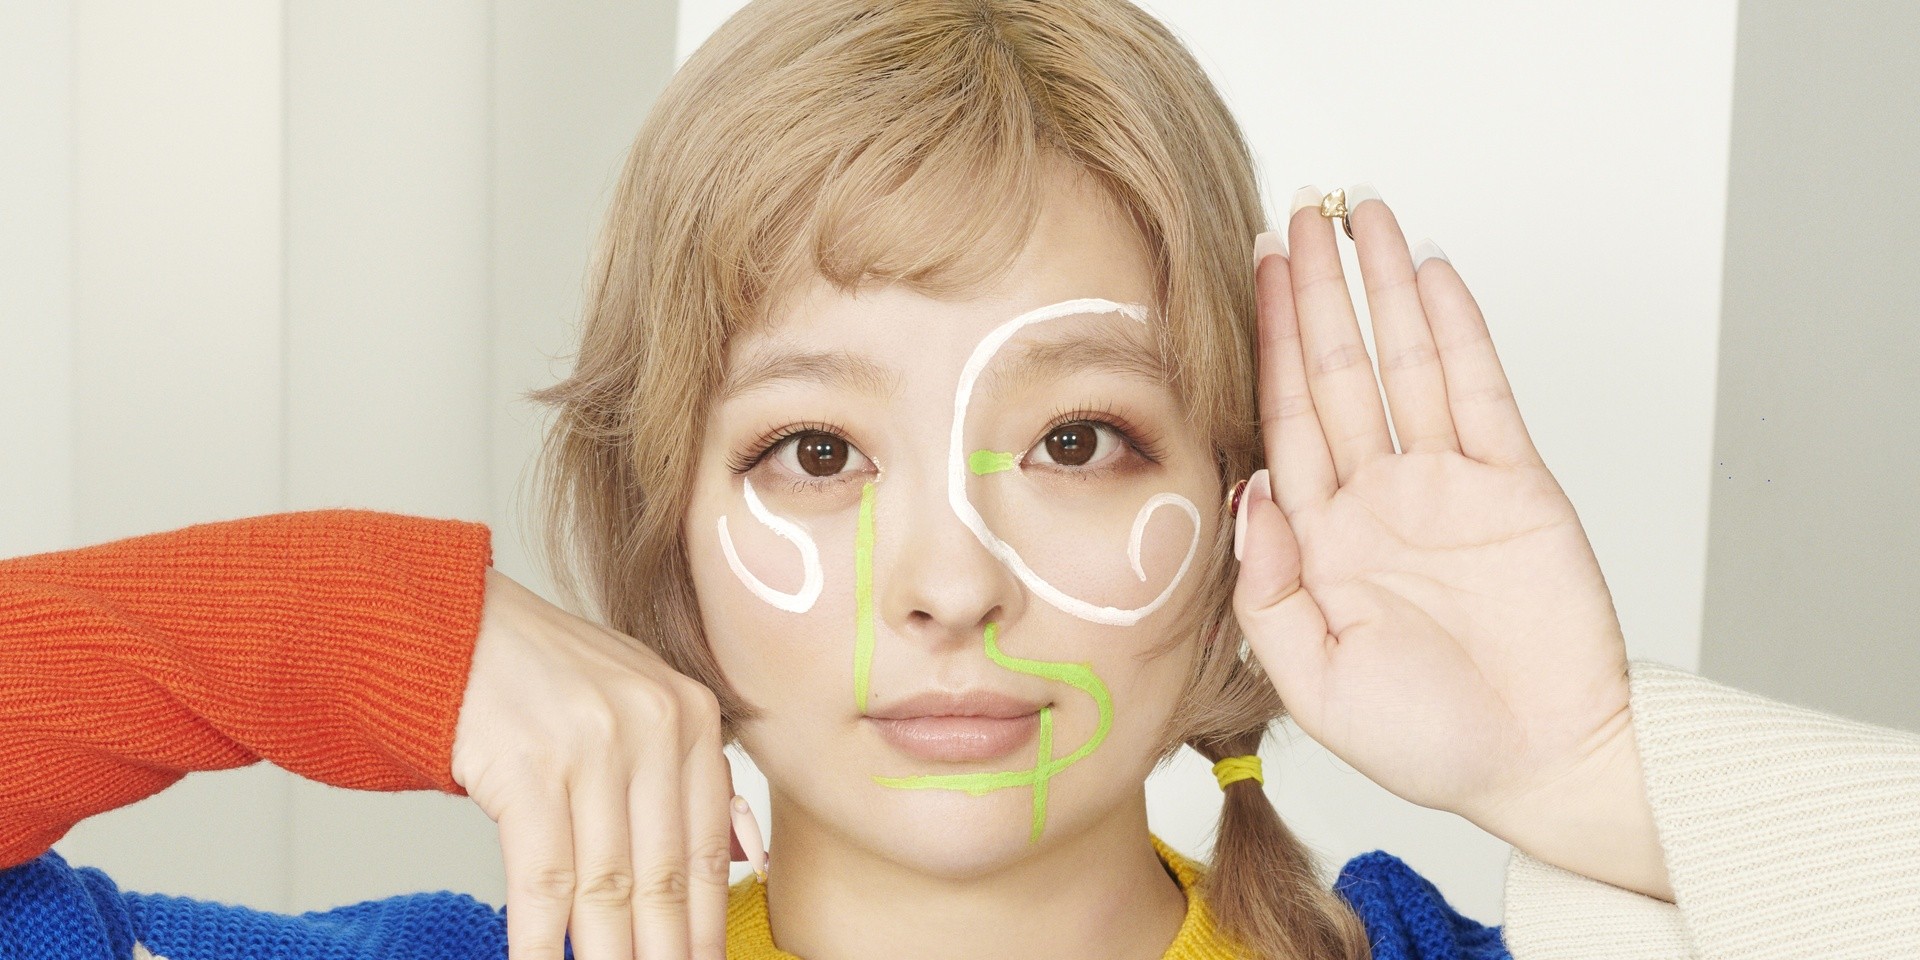 Kyary Pamyu Pamyu on her colourful release Candy Racer and starting up her personal record label KRK Lab